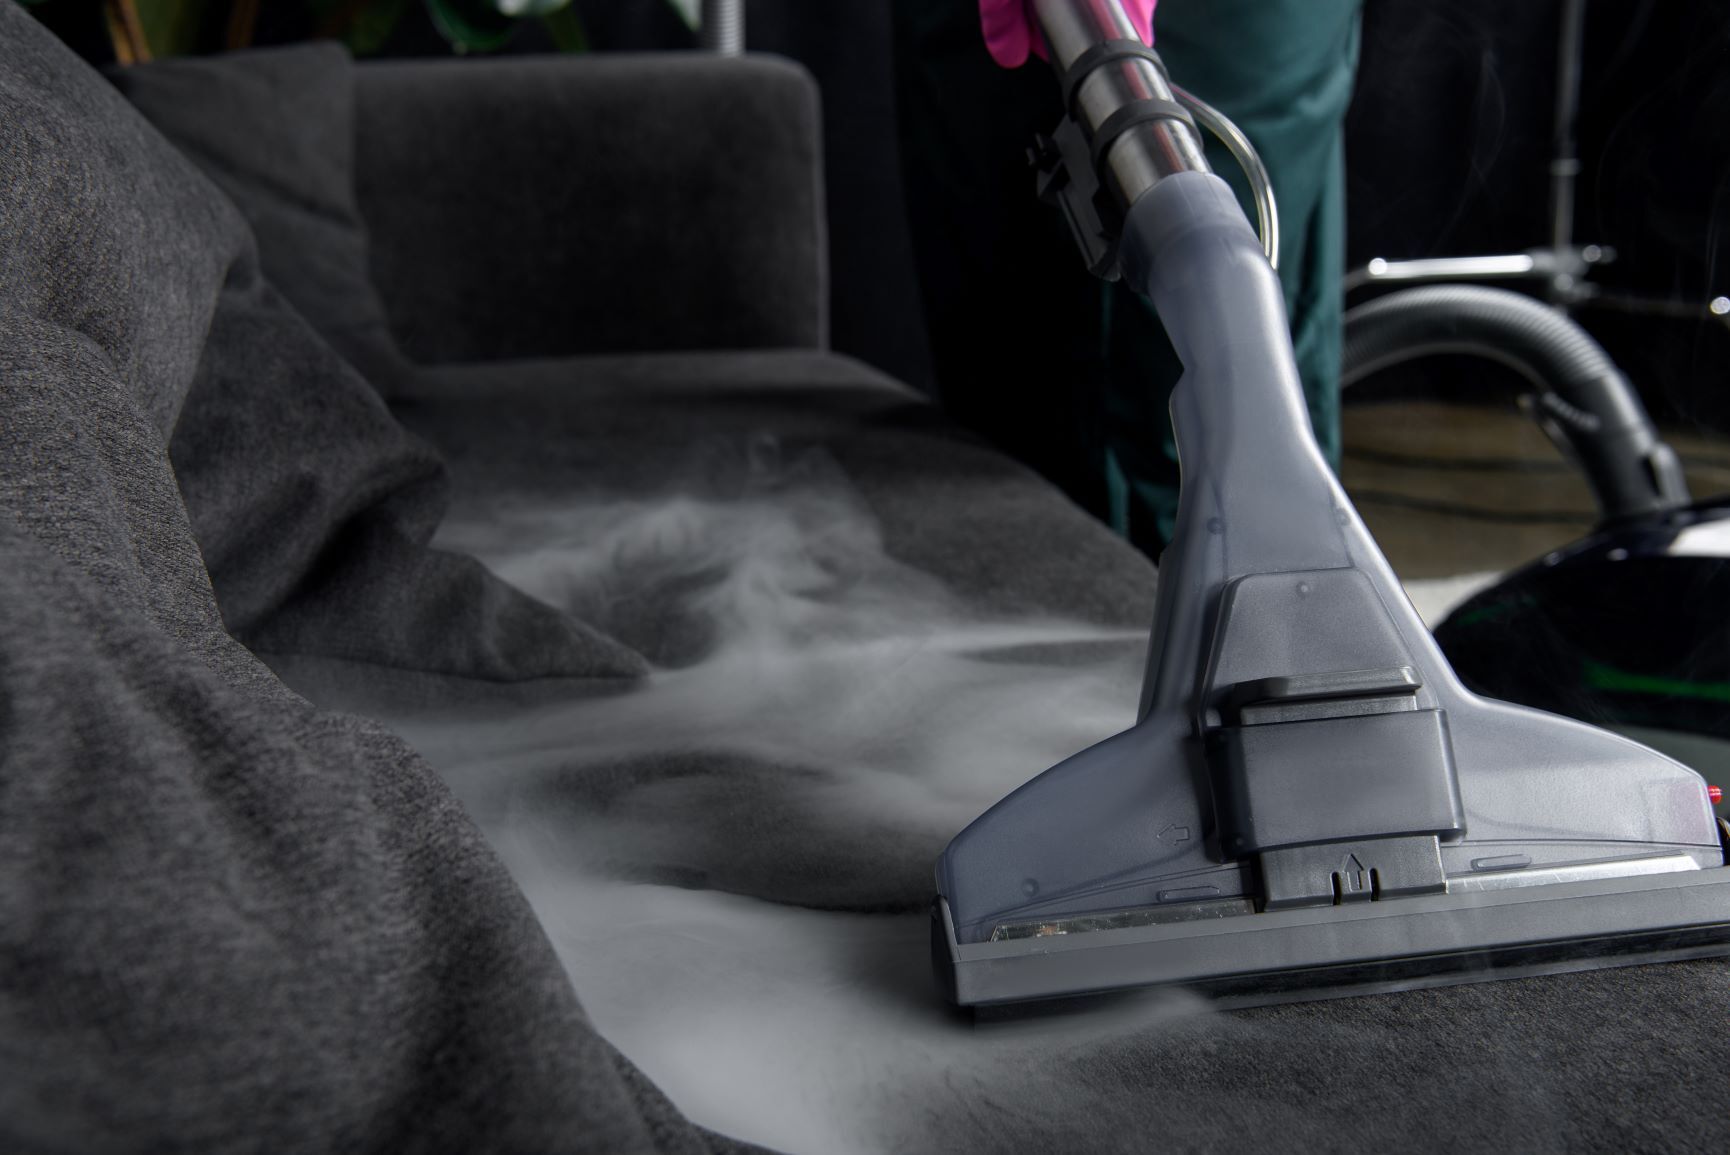 Professional upholstery cleaning service demonstration.